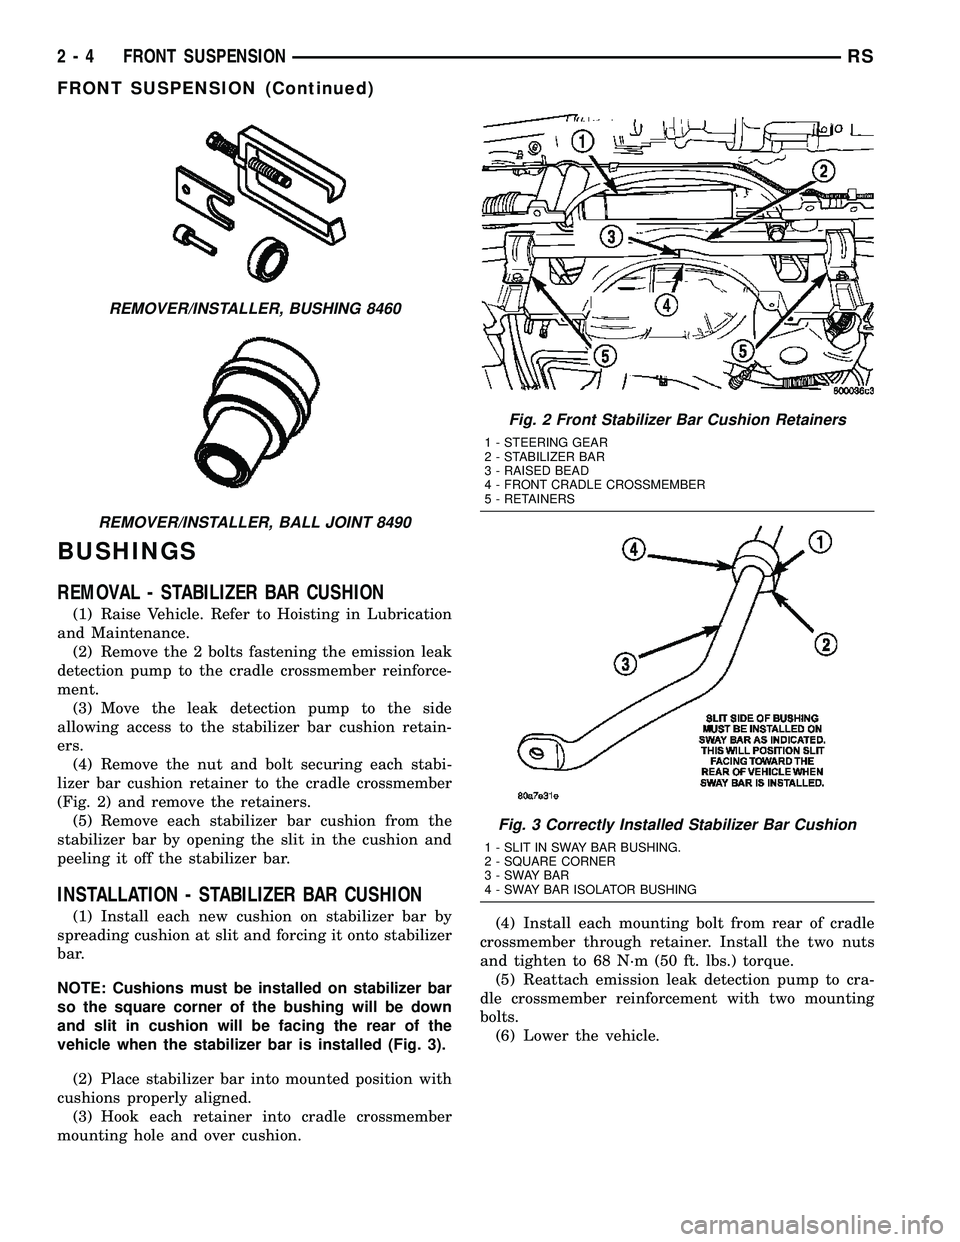 CHRYSLER CARAVAN 2005 Workshop Manual BUSHINGS
REMOVAL - STABILIZER BAR CUSHION
(1) Raise Vehicle. Refer to Hoisting in Lubrication
and Maintenance.
(2) Remove the 2 bolts fastening the emission leak
detection pump to the cradle crossmemb